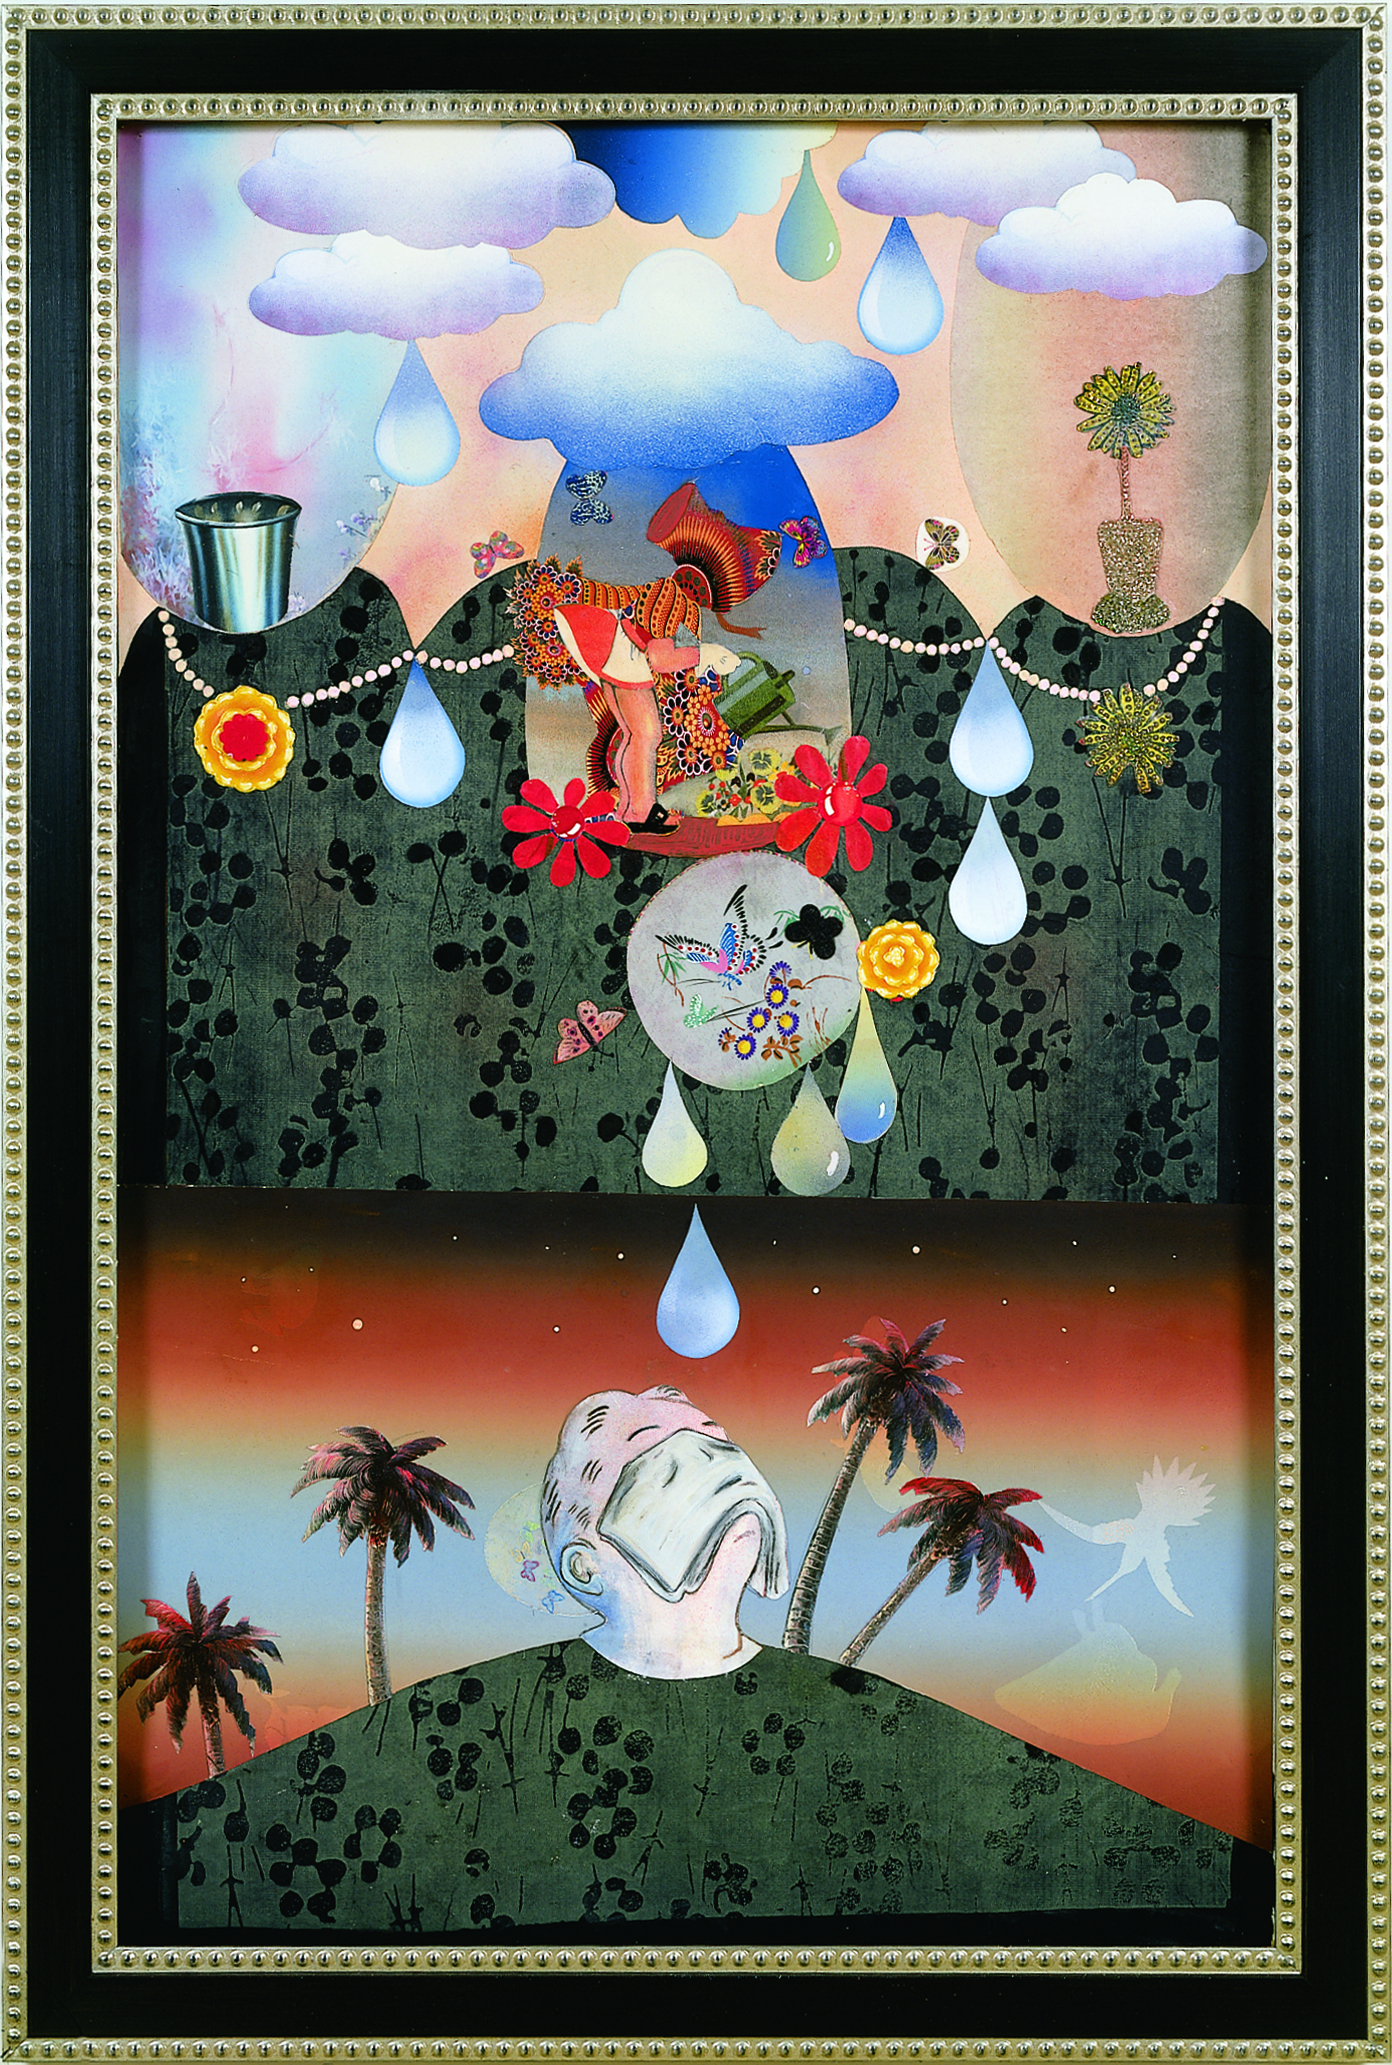 A World of Woe, 60" × 38", mixed media on paper, 2001